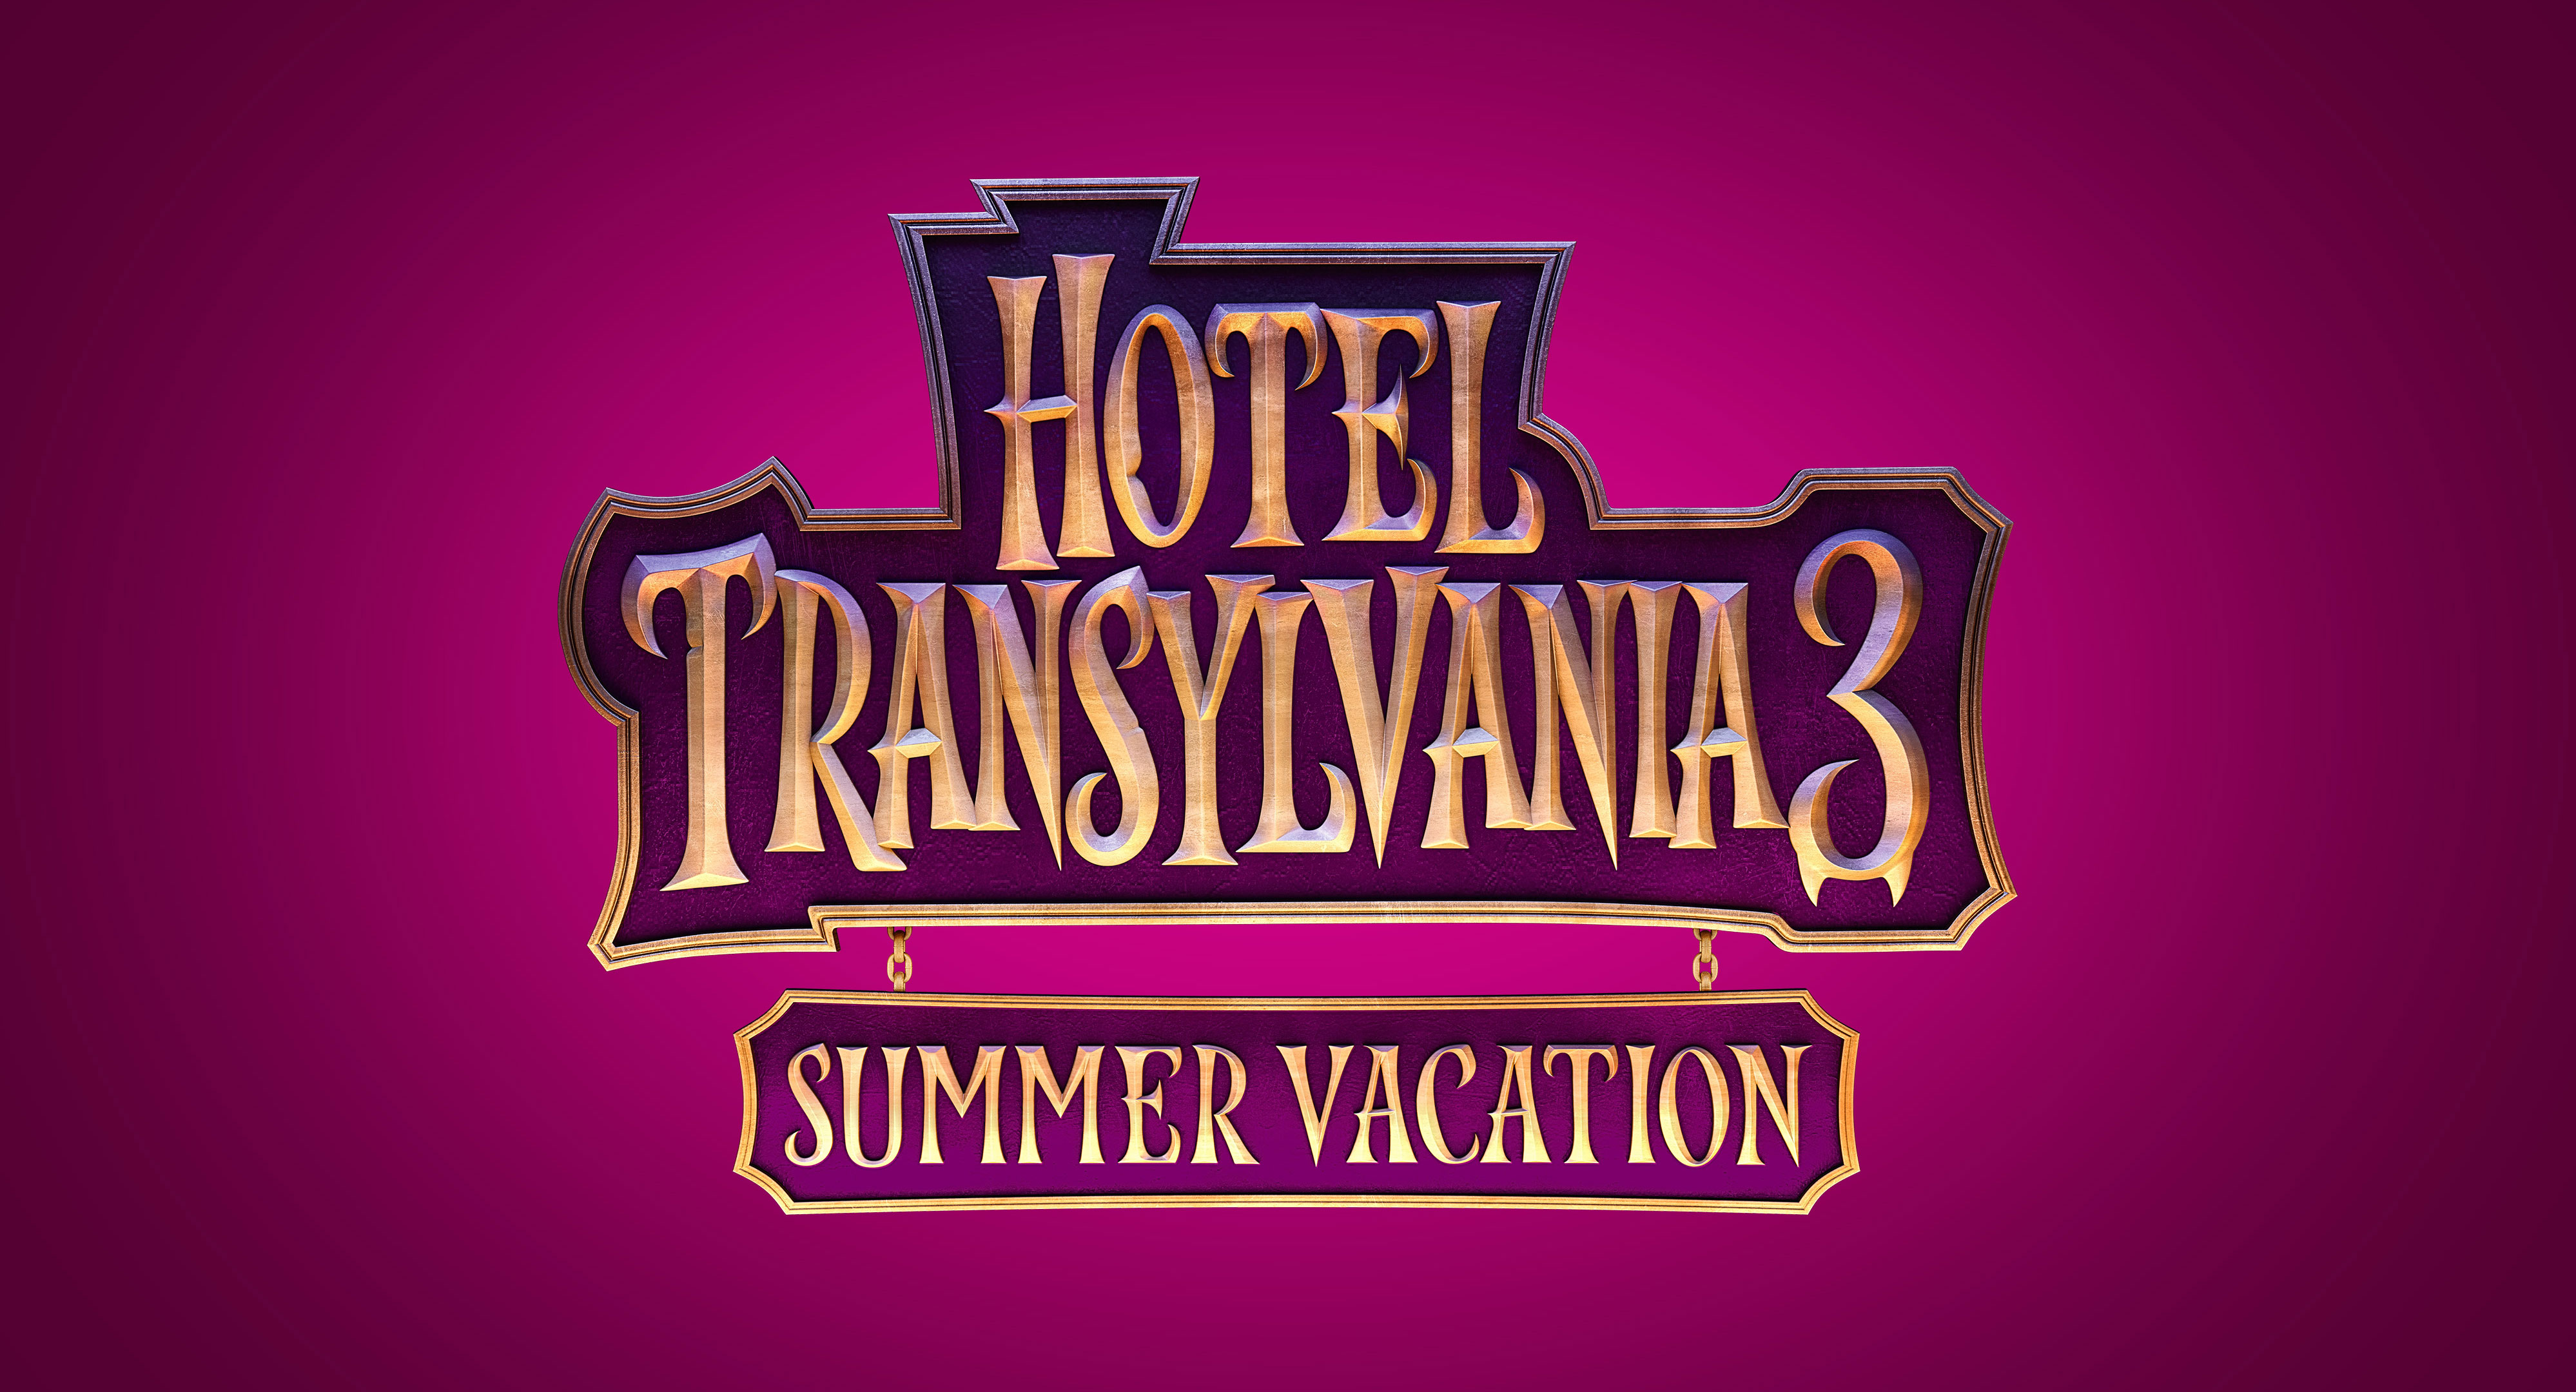 Hotel Transylvania 3: Summer Vacation | Sony Pictures Imageworks